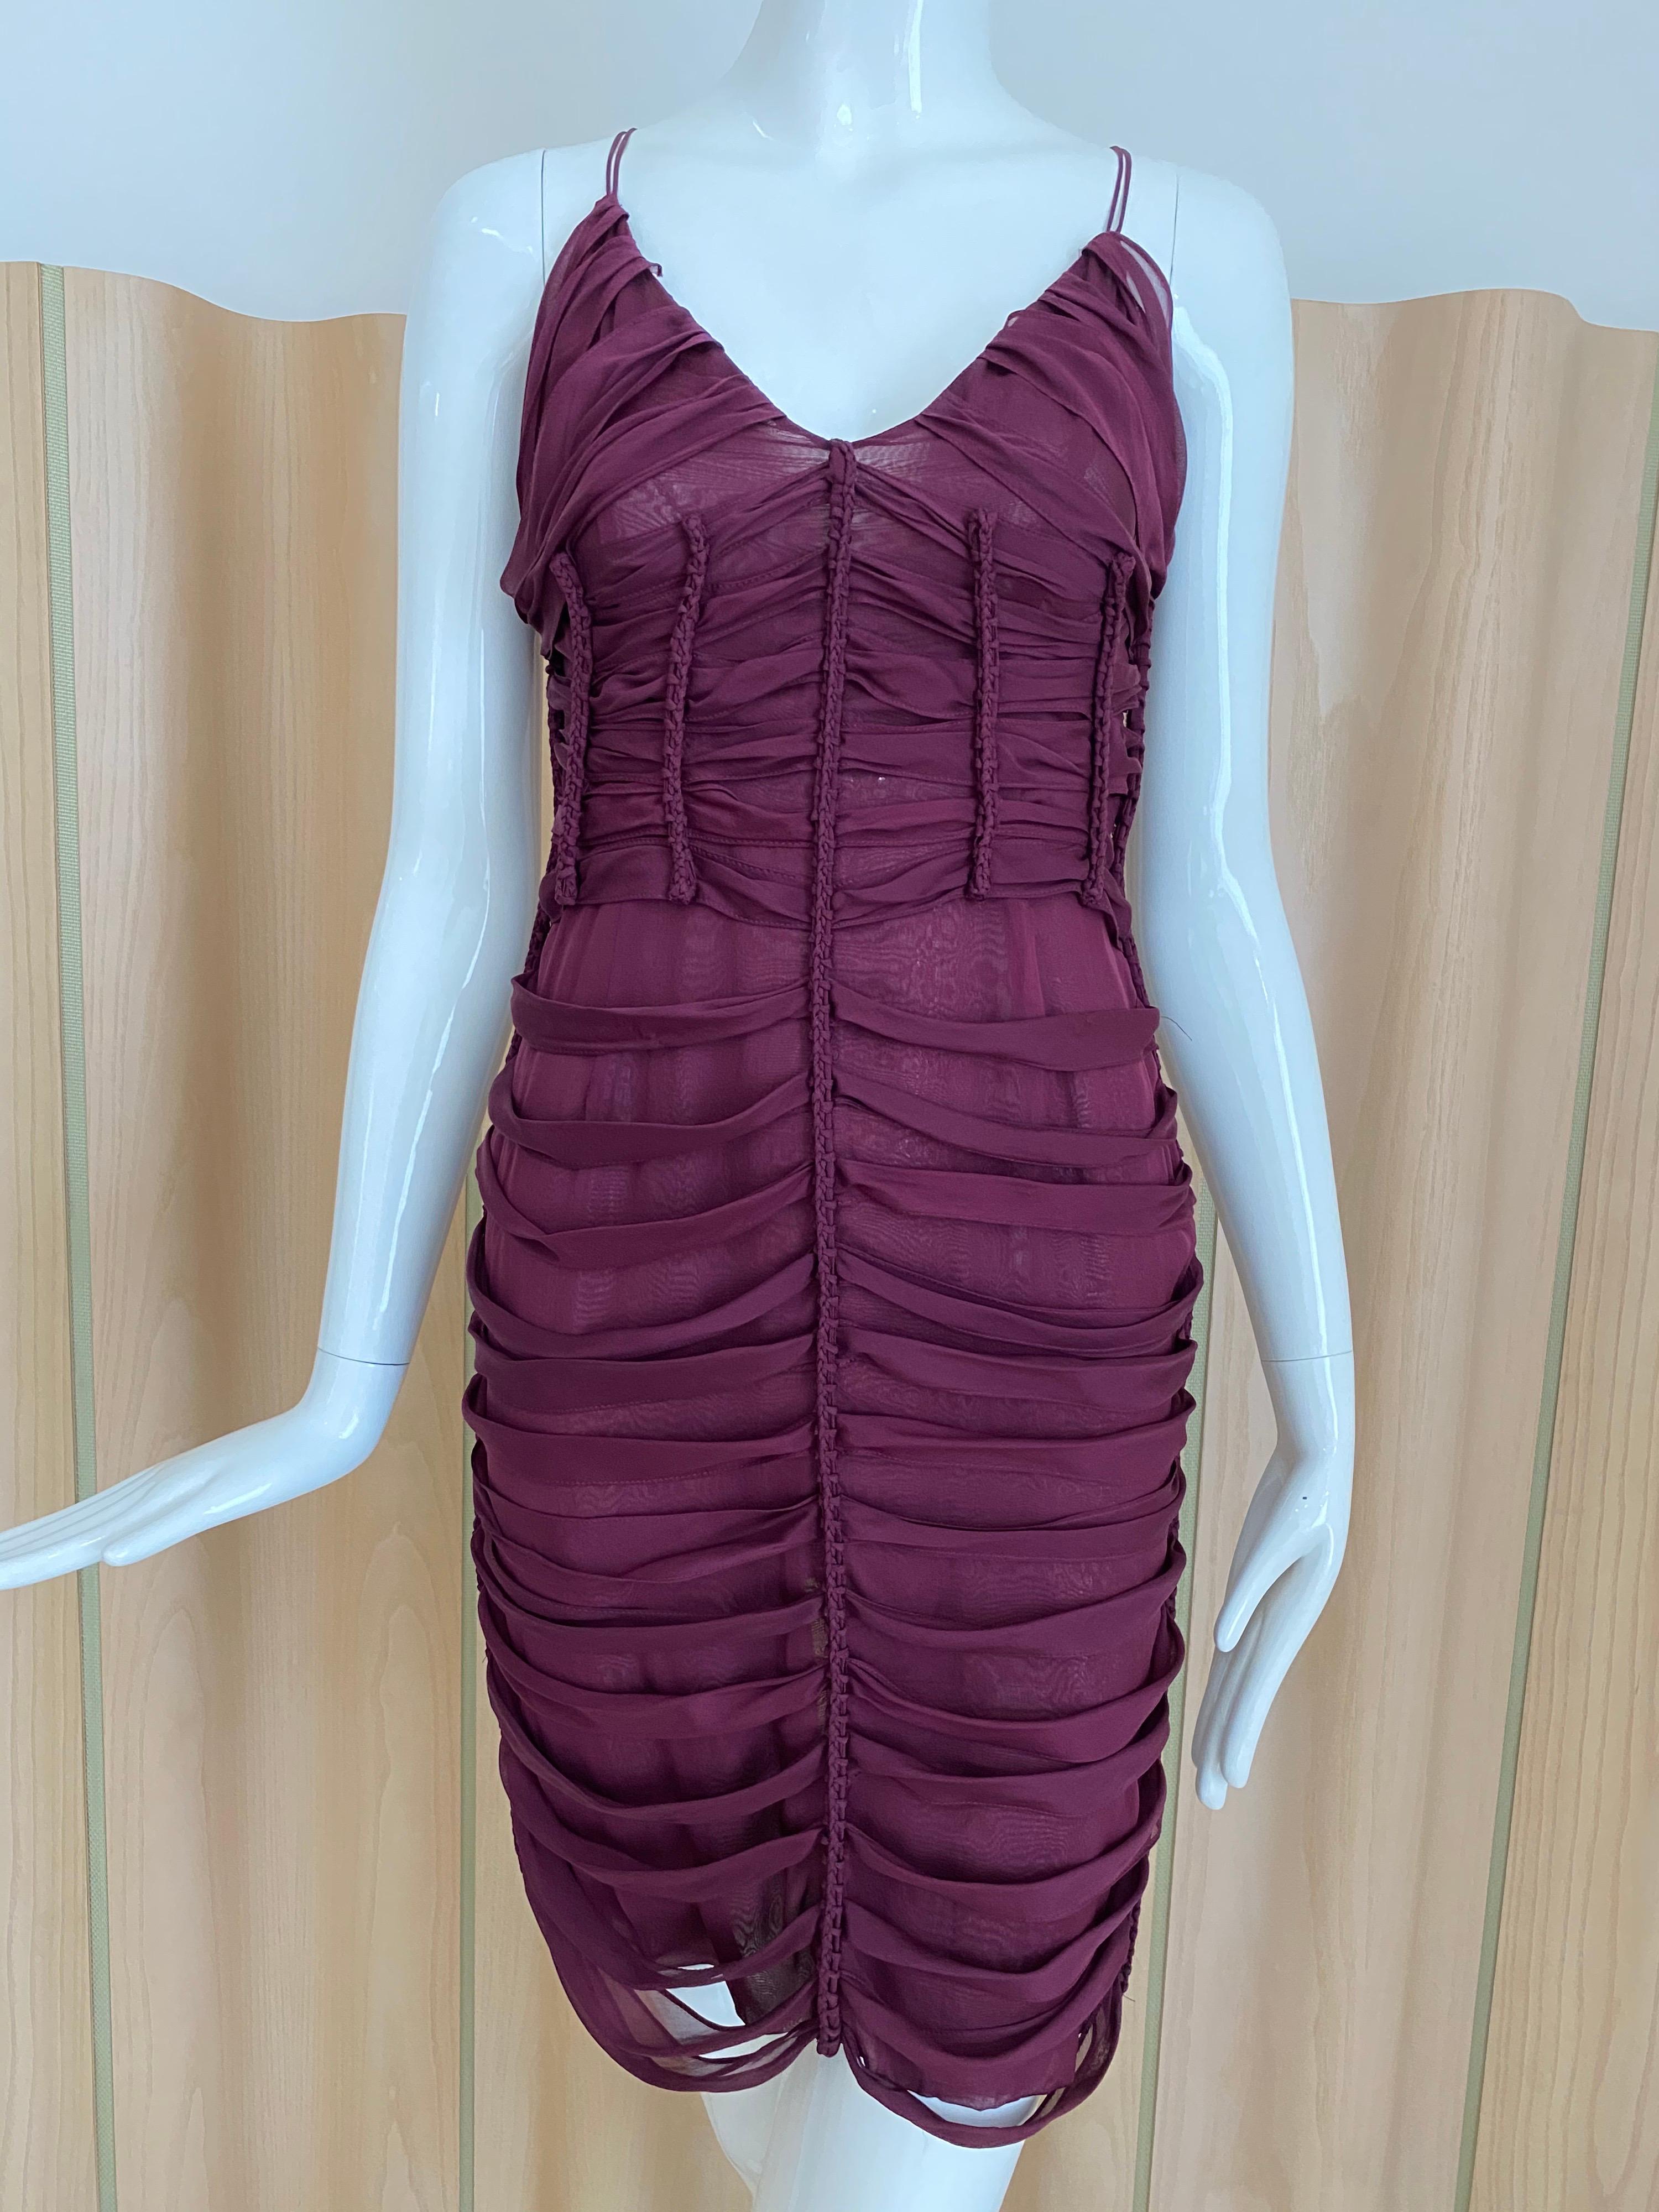 Gucci by Tom Ford sexy fitted spaghetti strap burgundy silk dress.
Size: 0/2 fit best for XS 
Measurement: Bust : 32” / Waist: 24”/ Hip: 33.5”